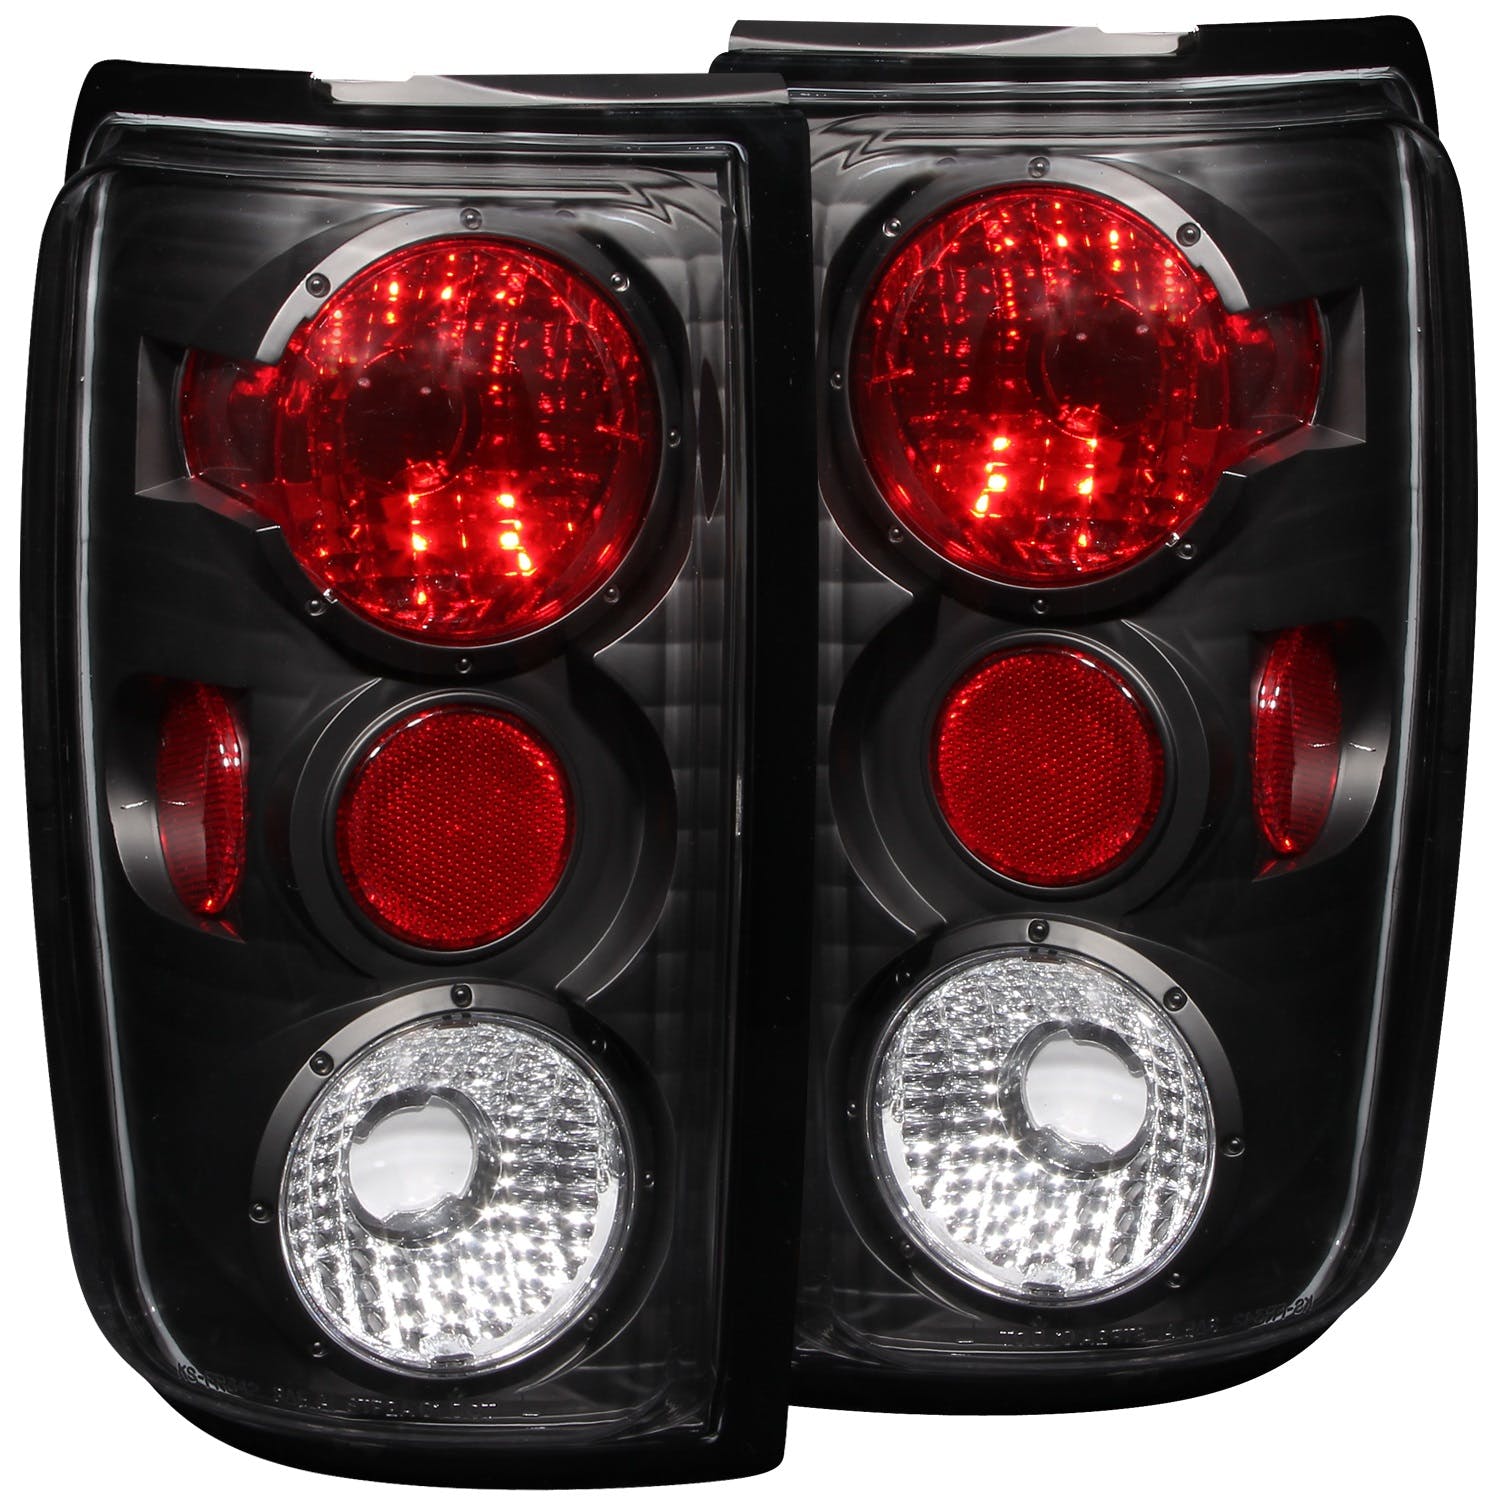 AnzoUSA 211057 Taillights Black